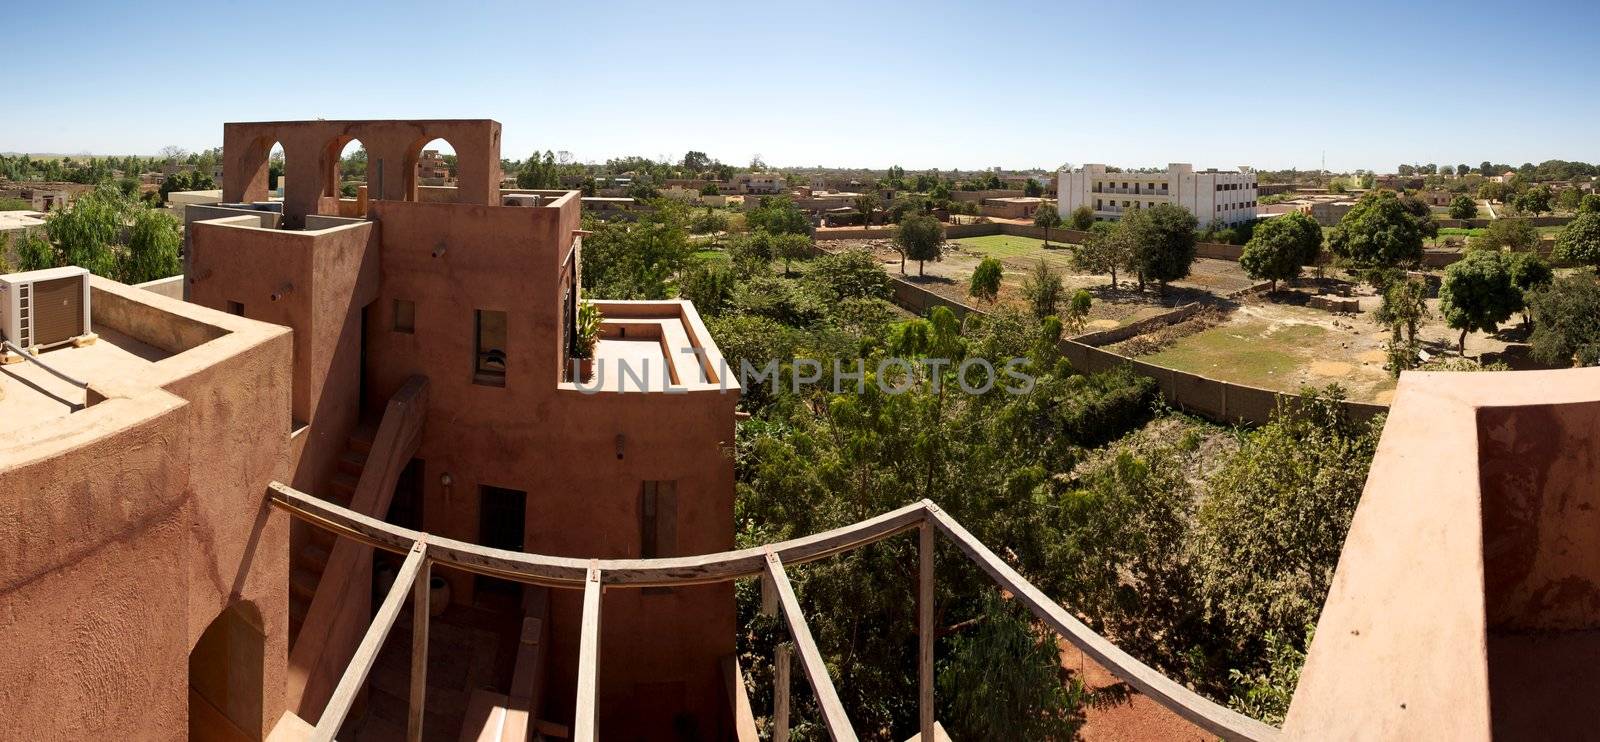 Wonderful moroccan style architecture in Mopti, in the land of the Dogons